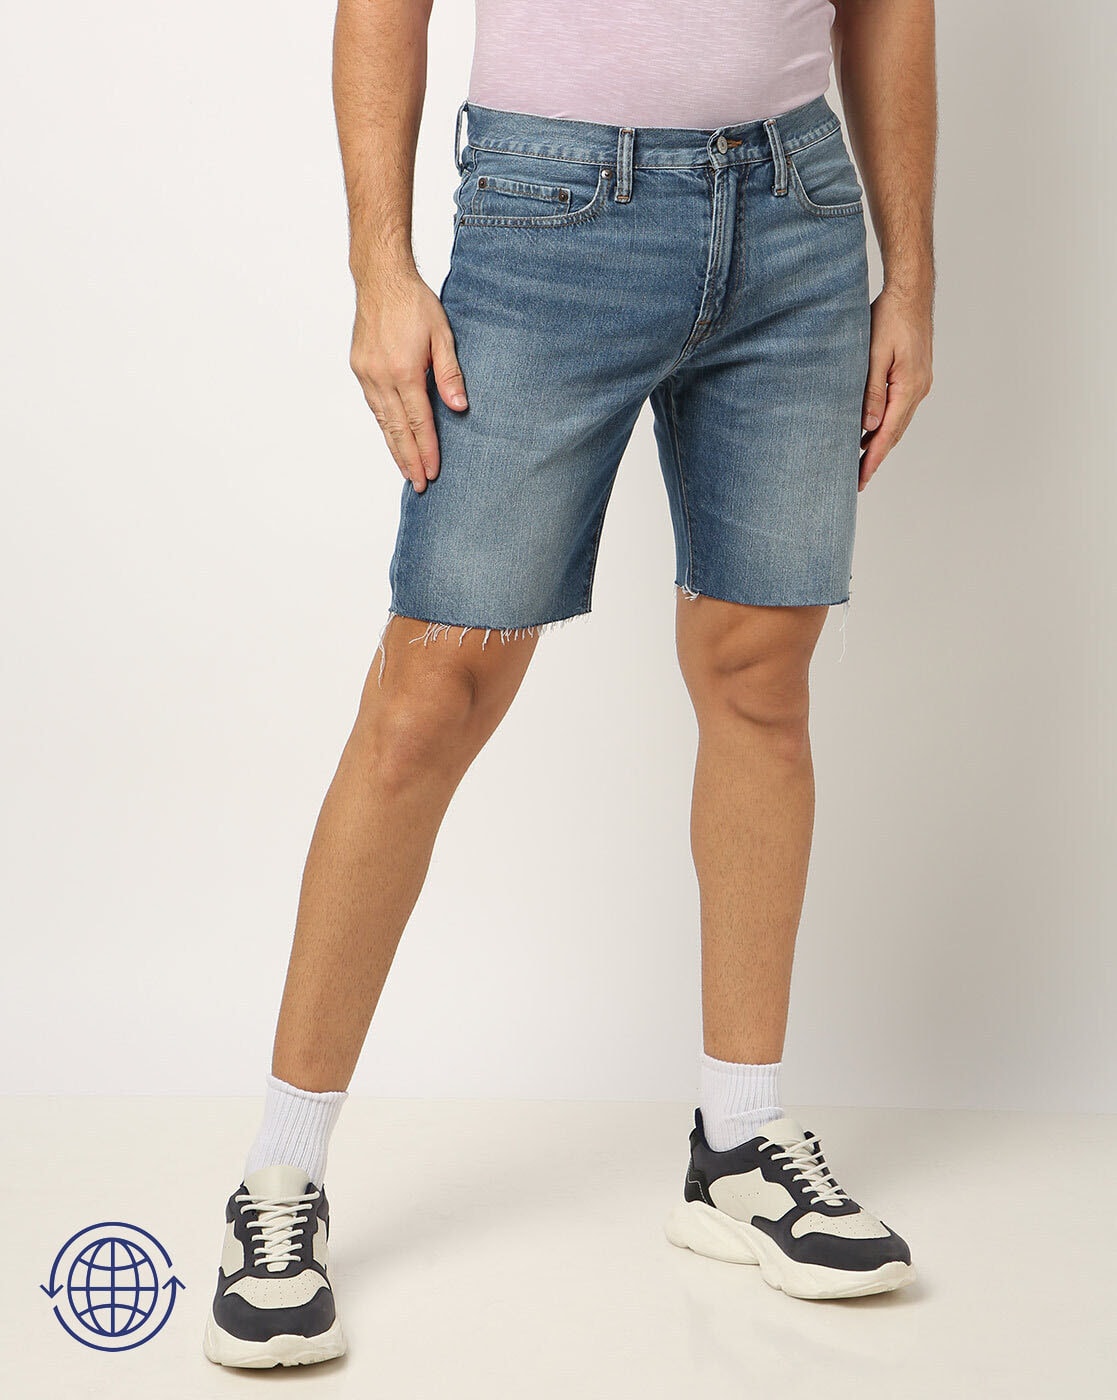 Levi's 501 mid thigh shorts in midwash blue